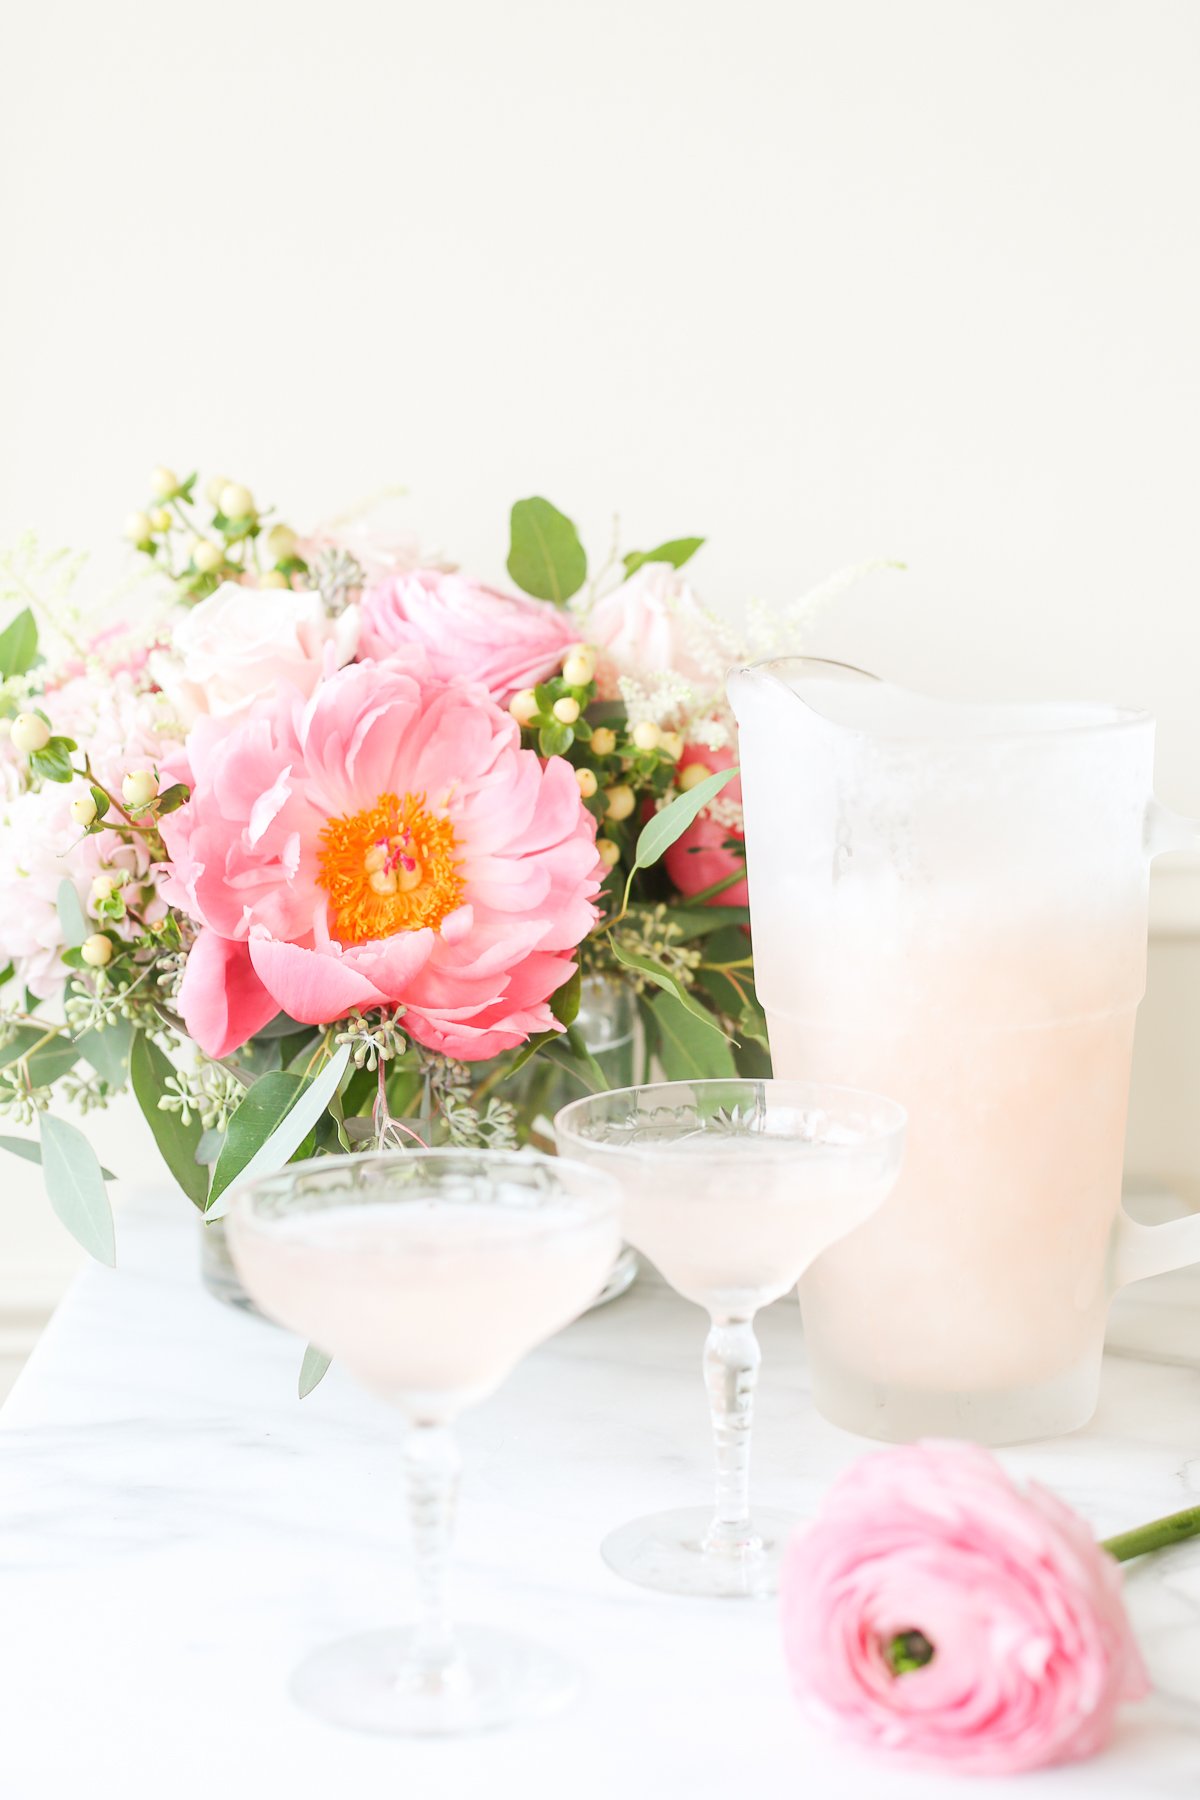 A pink peony flower in a vase next to two glasses of liquid.